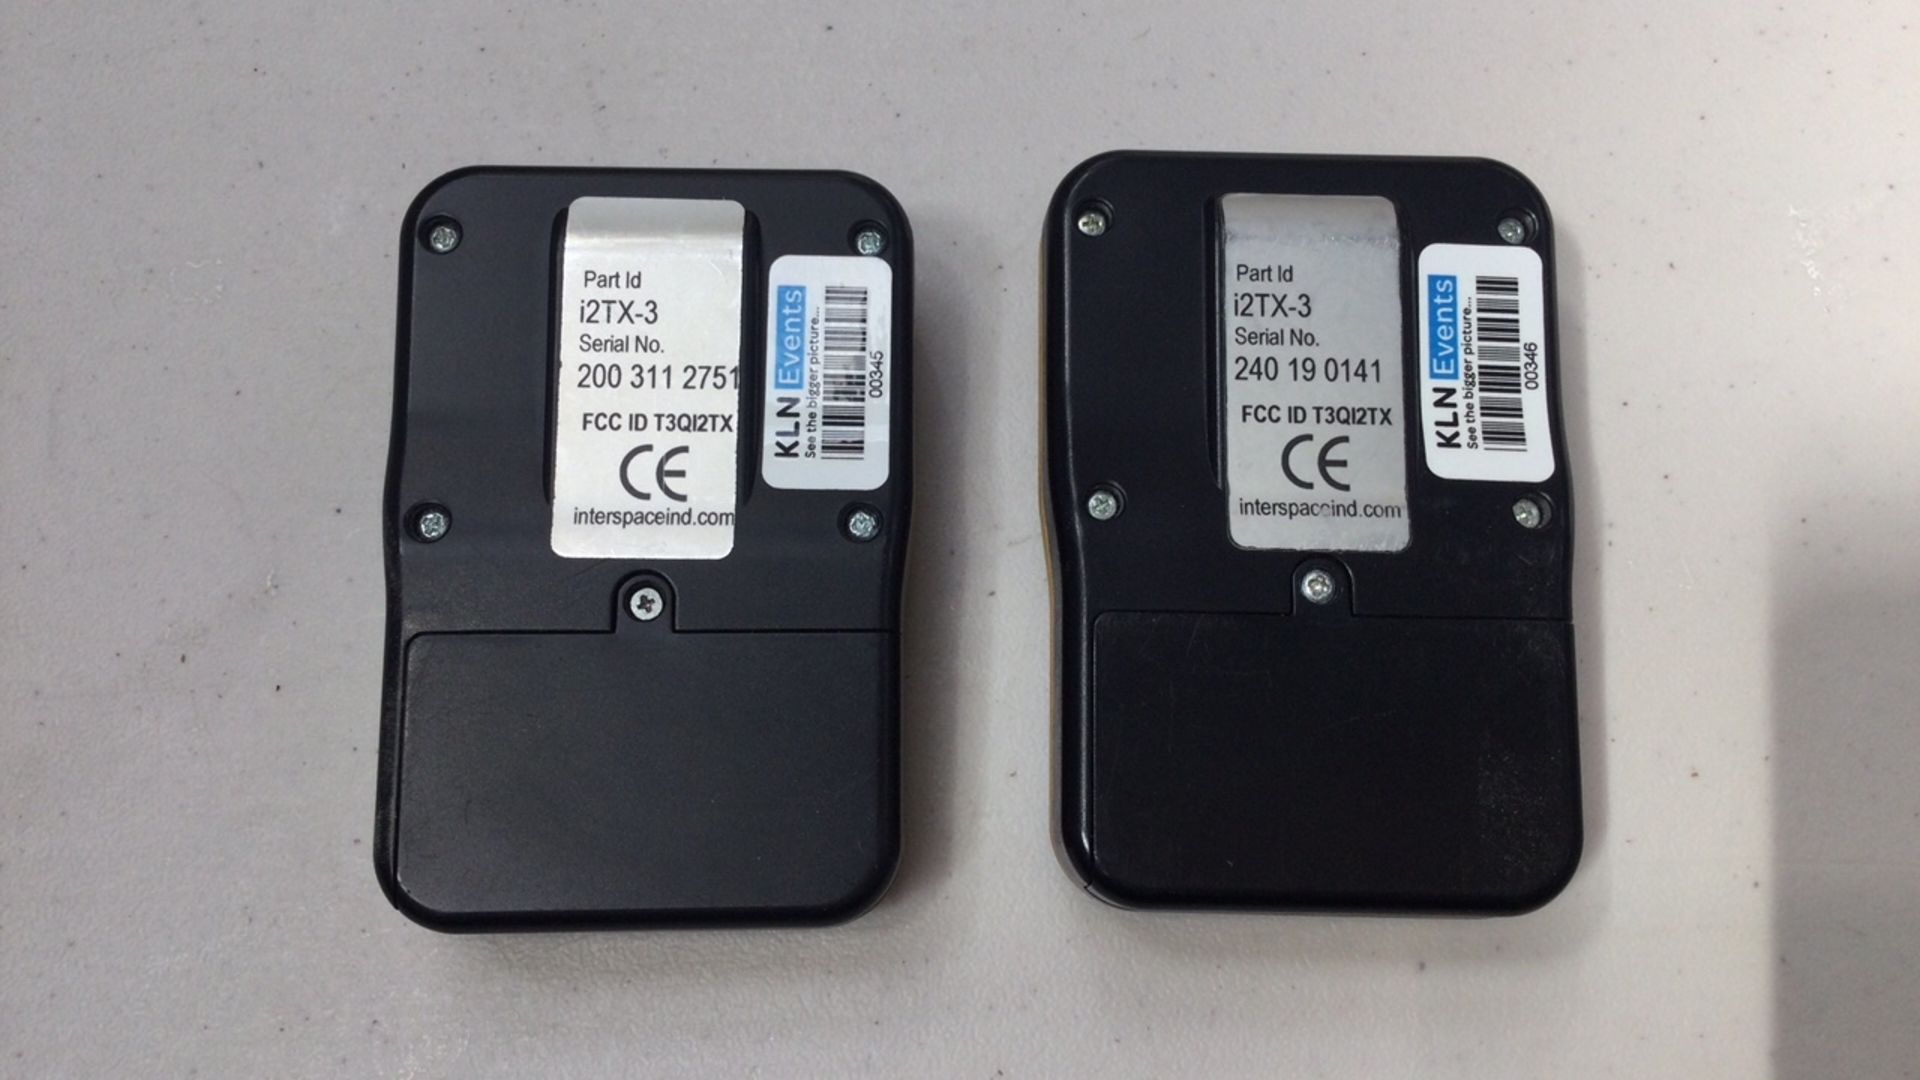 2x Interspace V2 Cuelite Clickers (i2TX-3) SPARES - Image 2 of 2